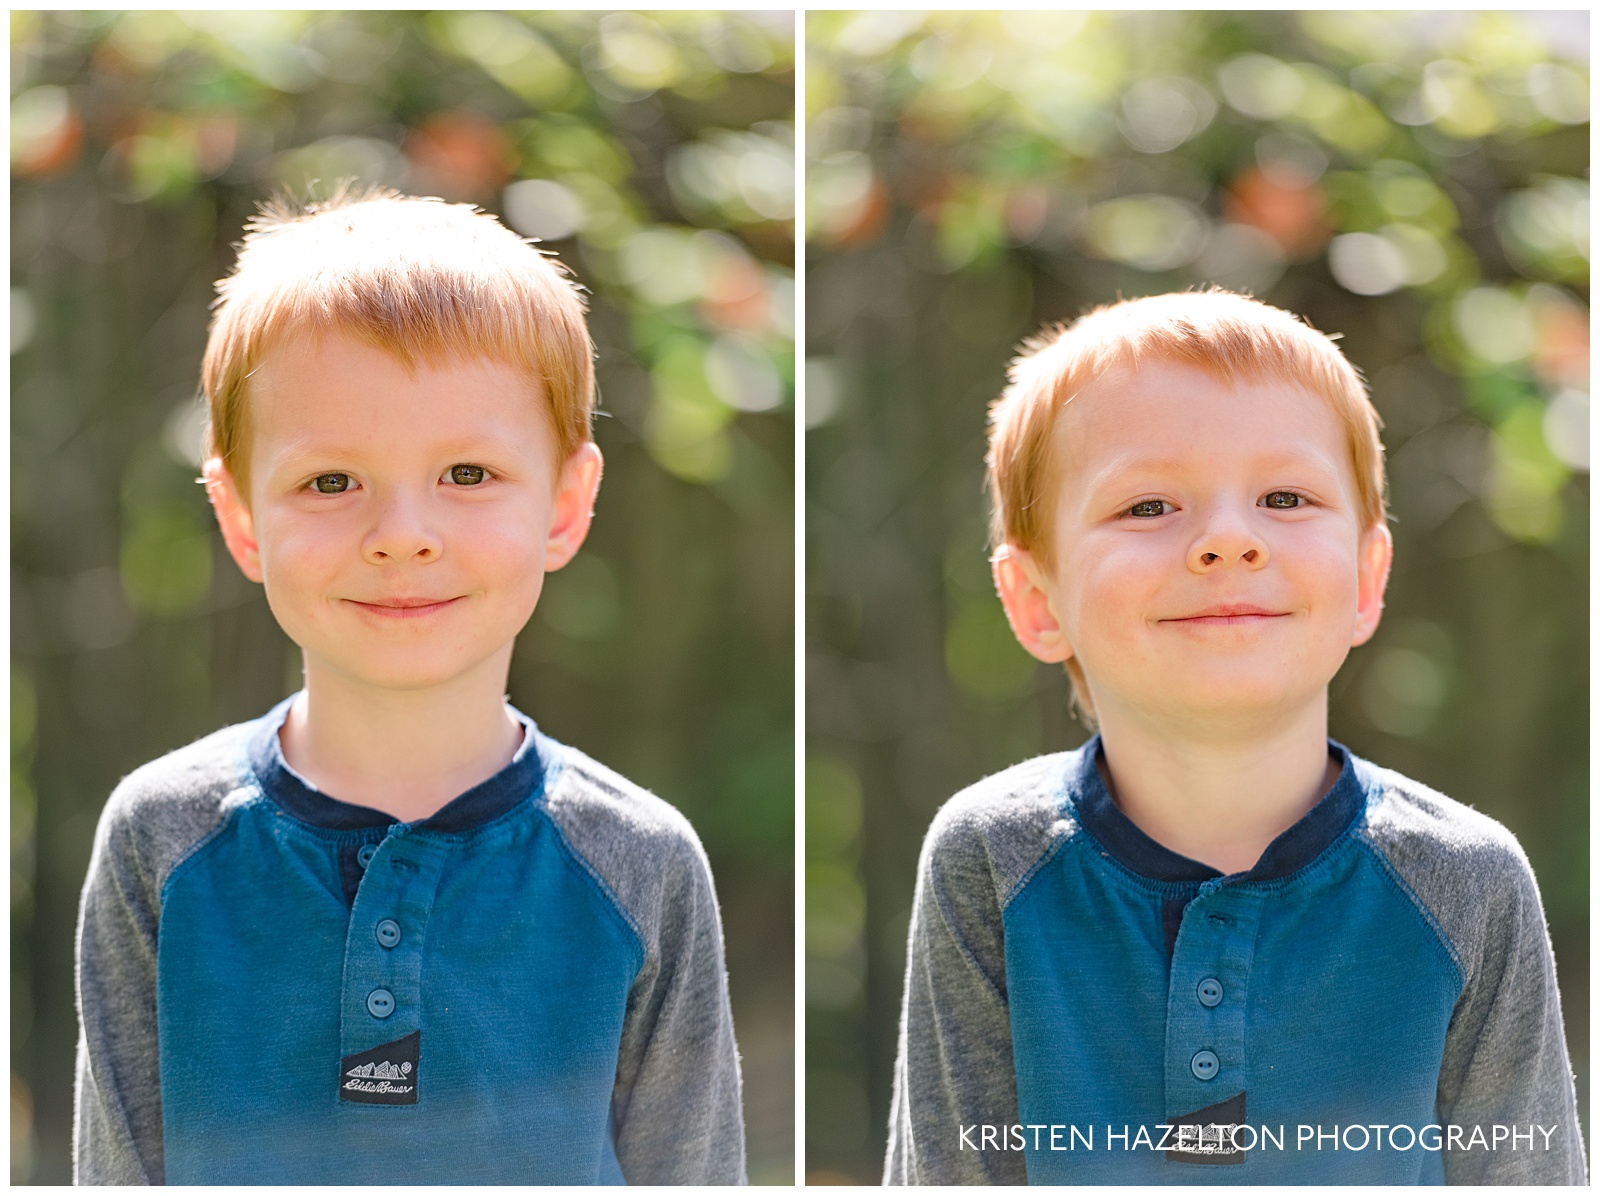 Portraits of a four-year old boy